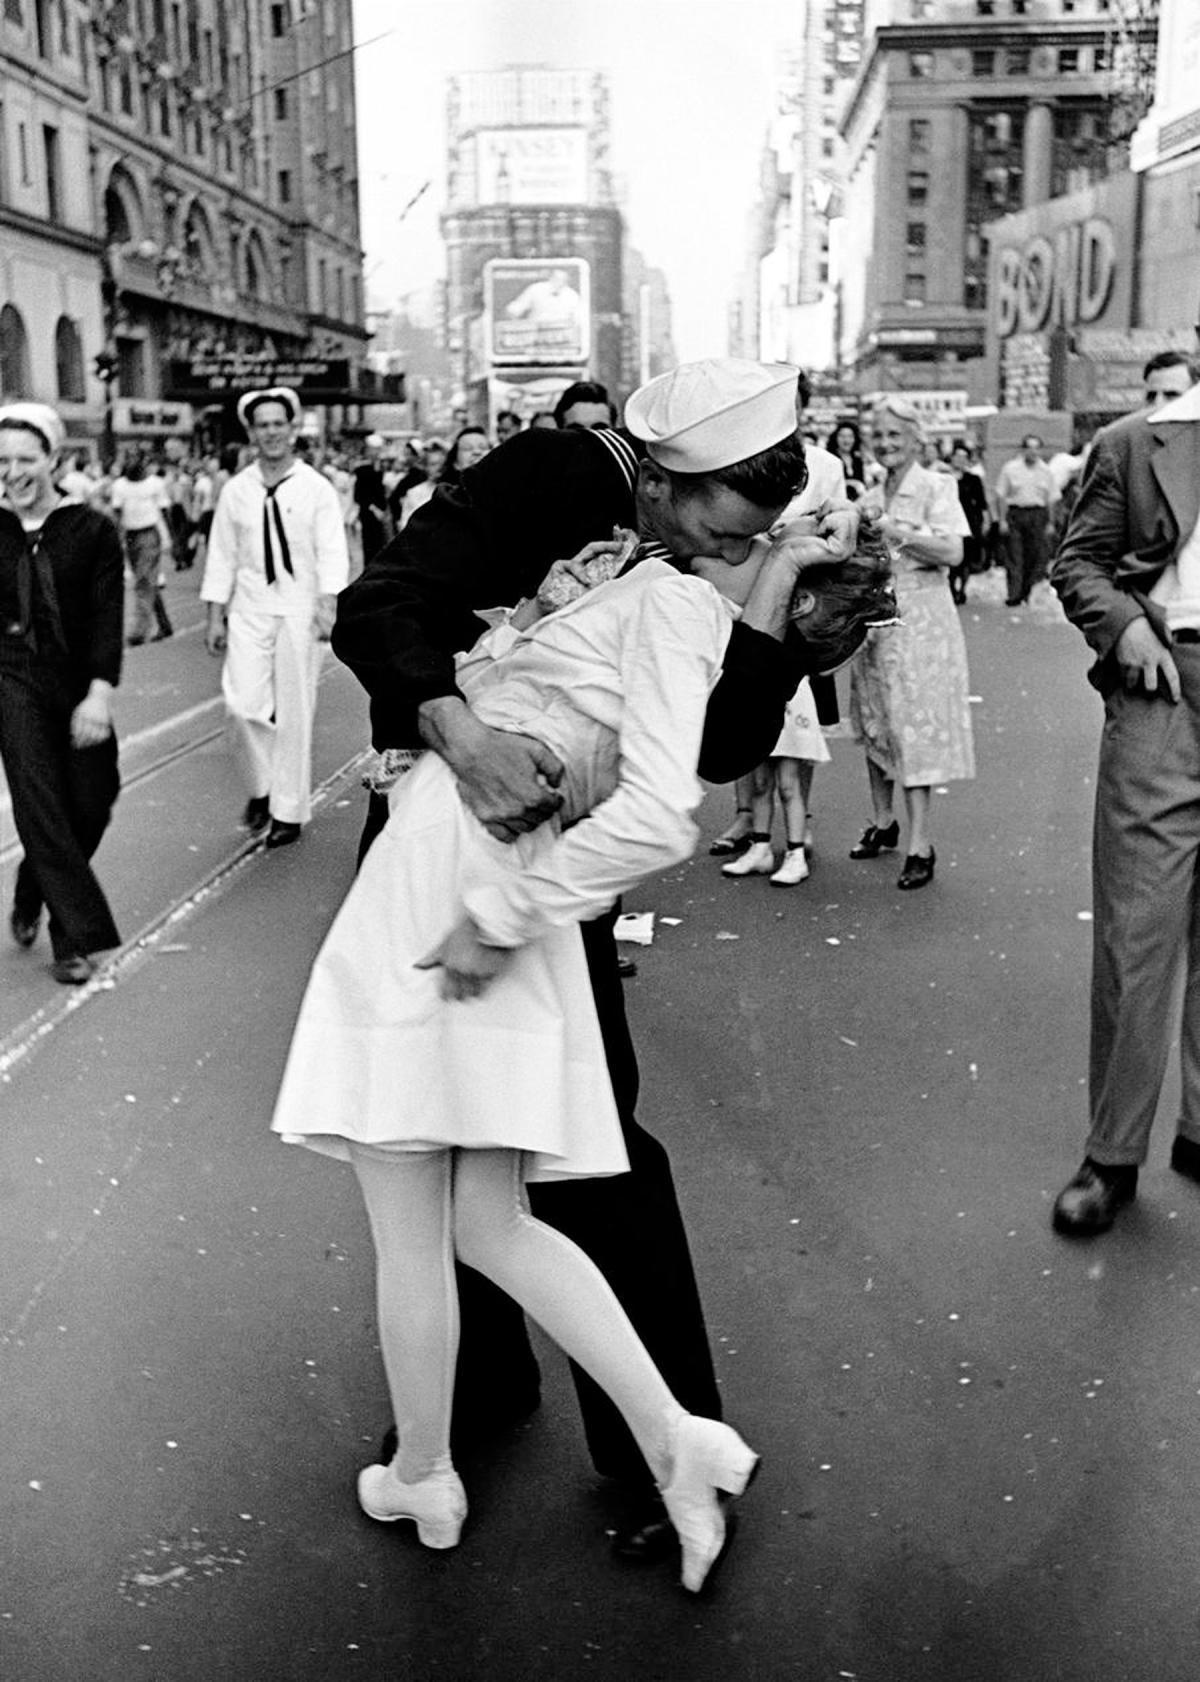 The Story Behind the Famous Kiss | Naval History Magazine - August ...